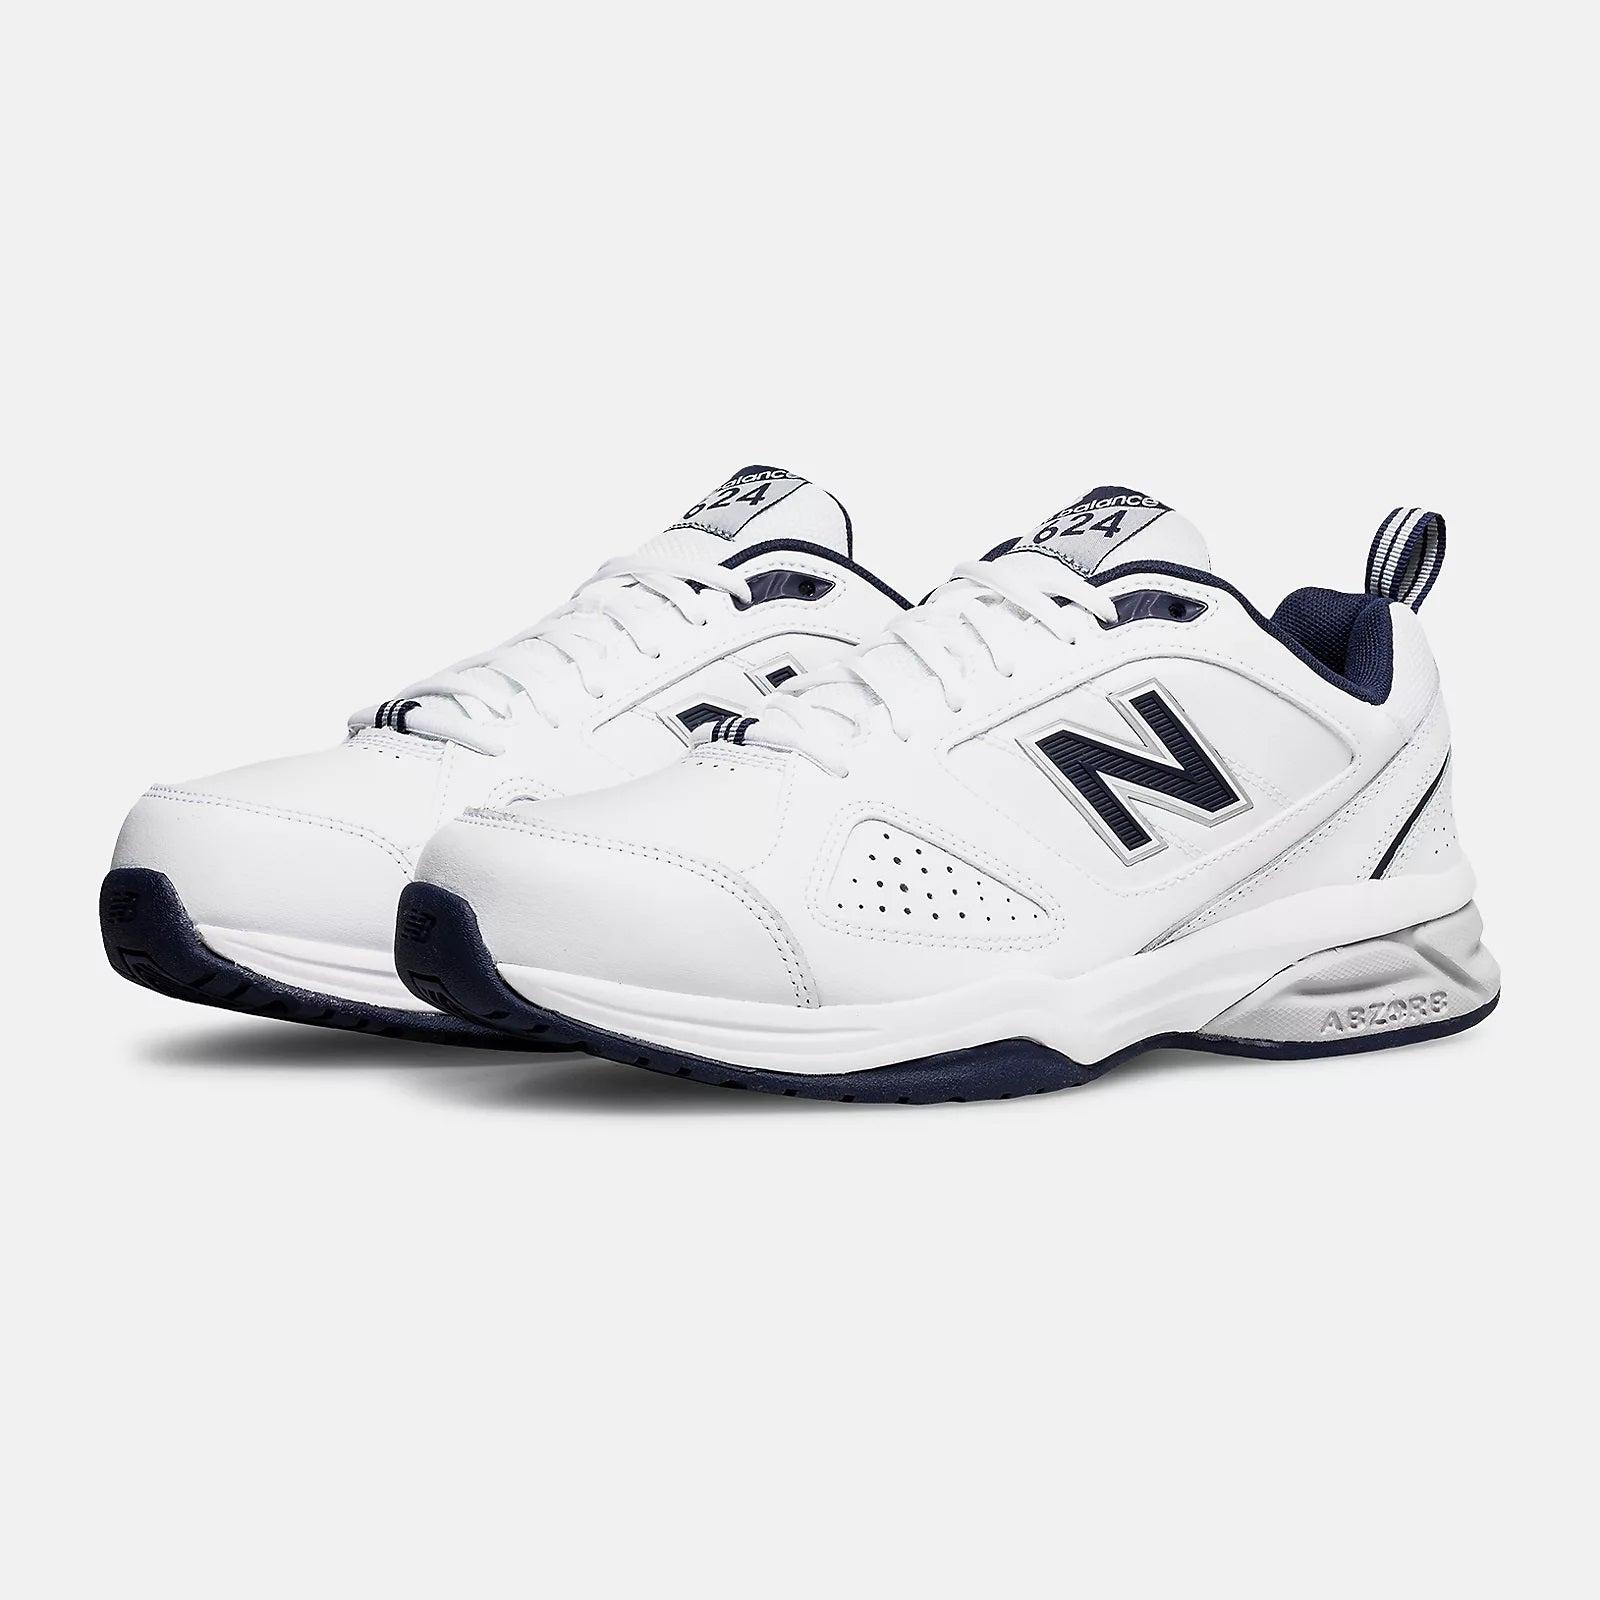 New Balance Rubber S Wide Fit Mx624wn4 Trainers in White | Lyst